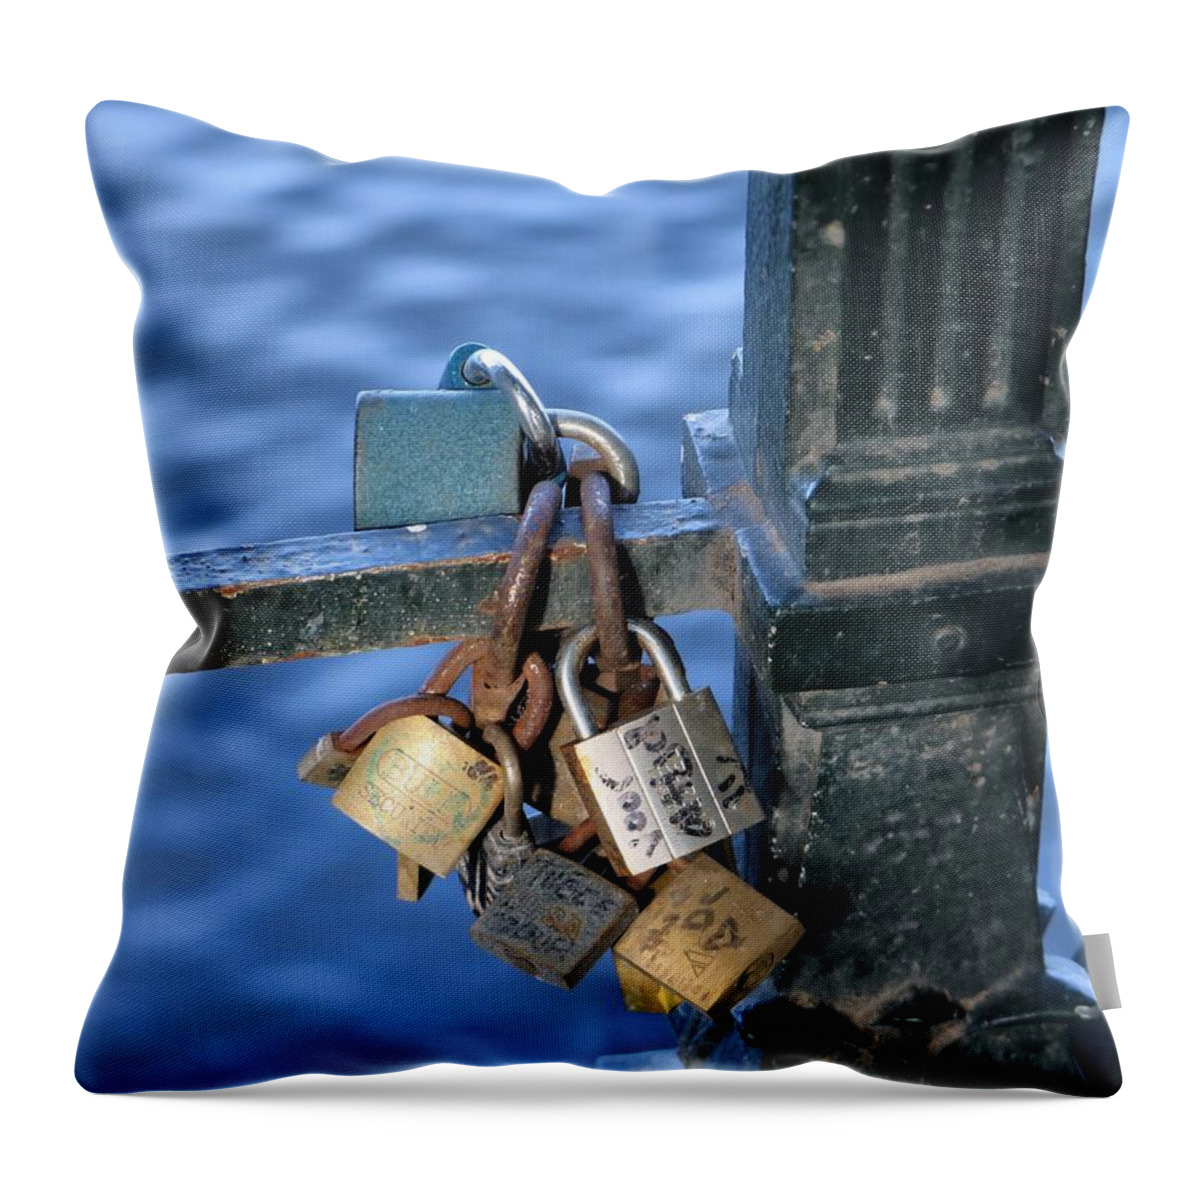 Lock Throw Pillow featuring the photograph Love Lock by Gia Marie Houck